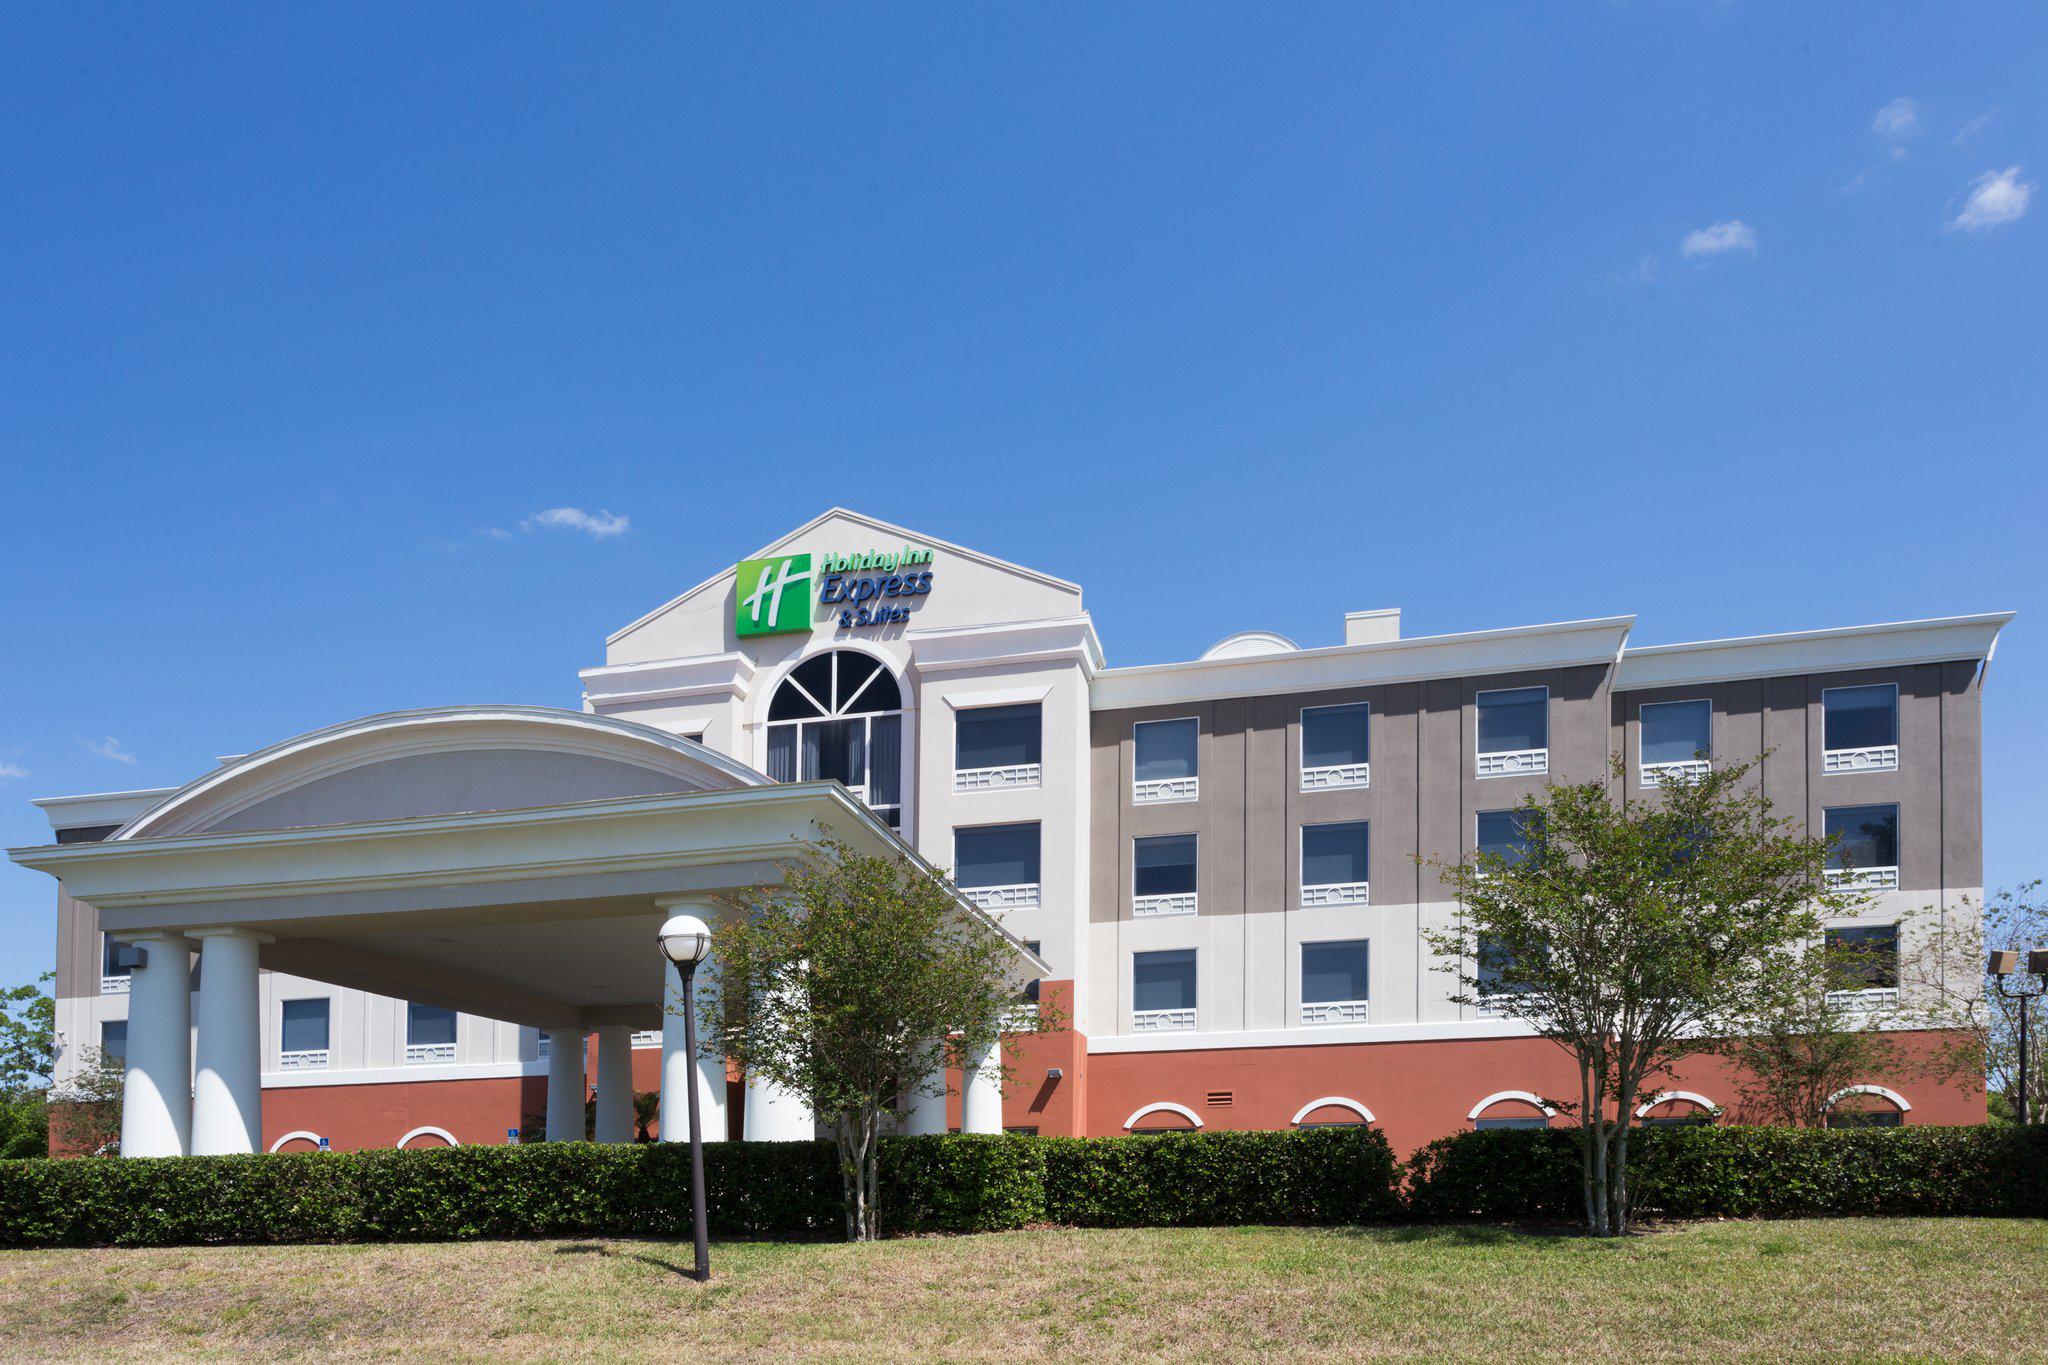 Holiday Inn Express & Suites Tampa-Fairgrounds-Casino Photo